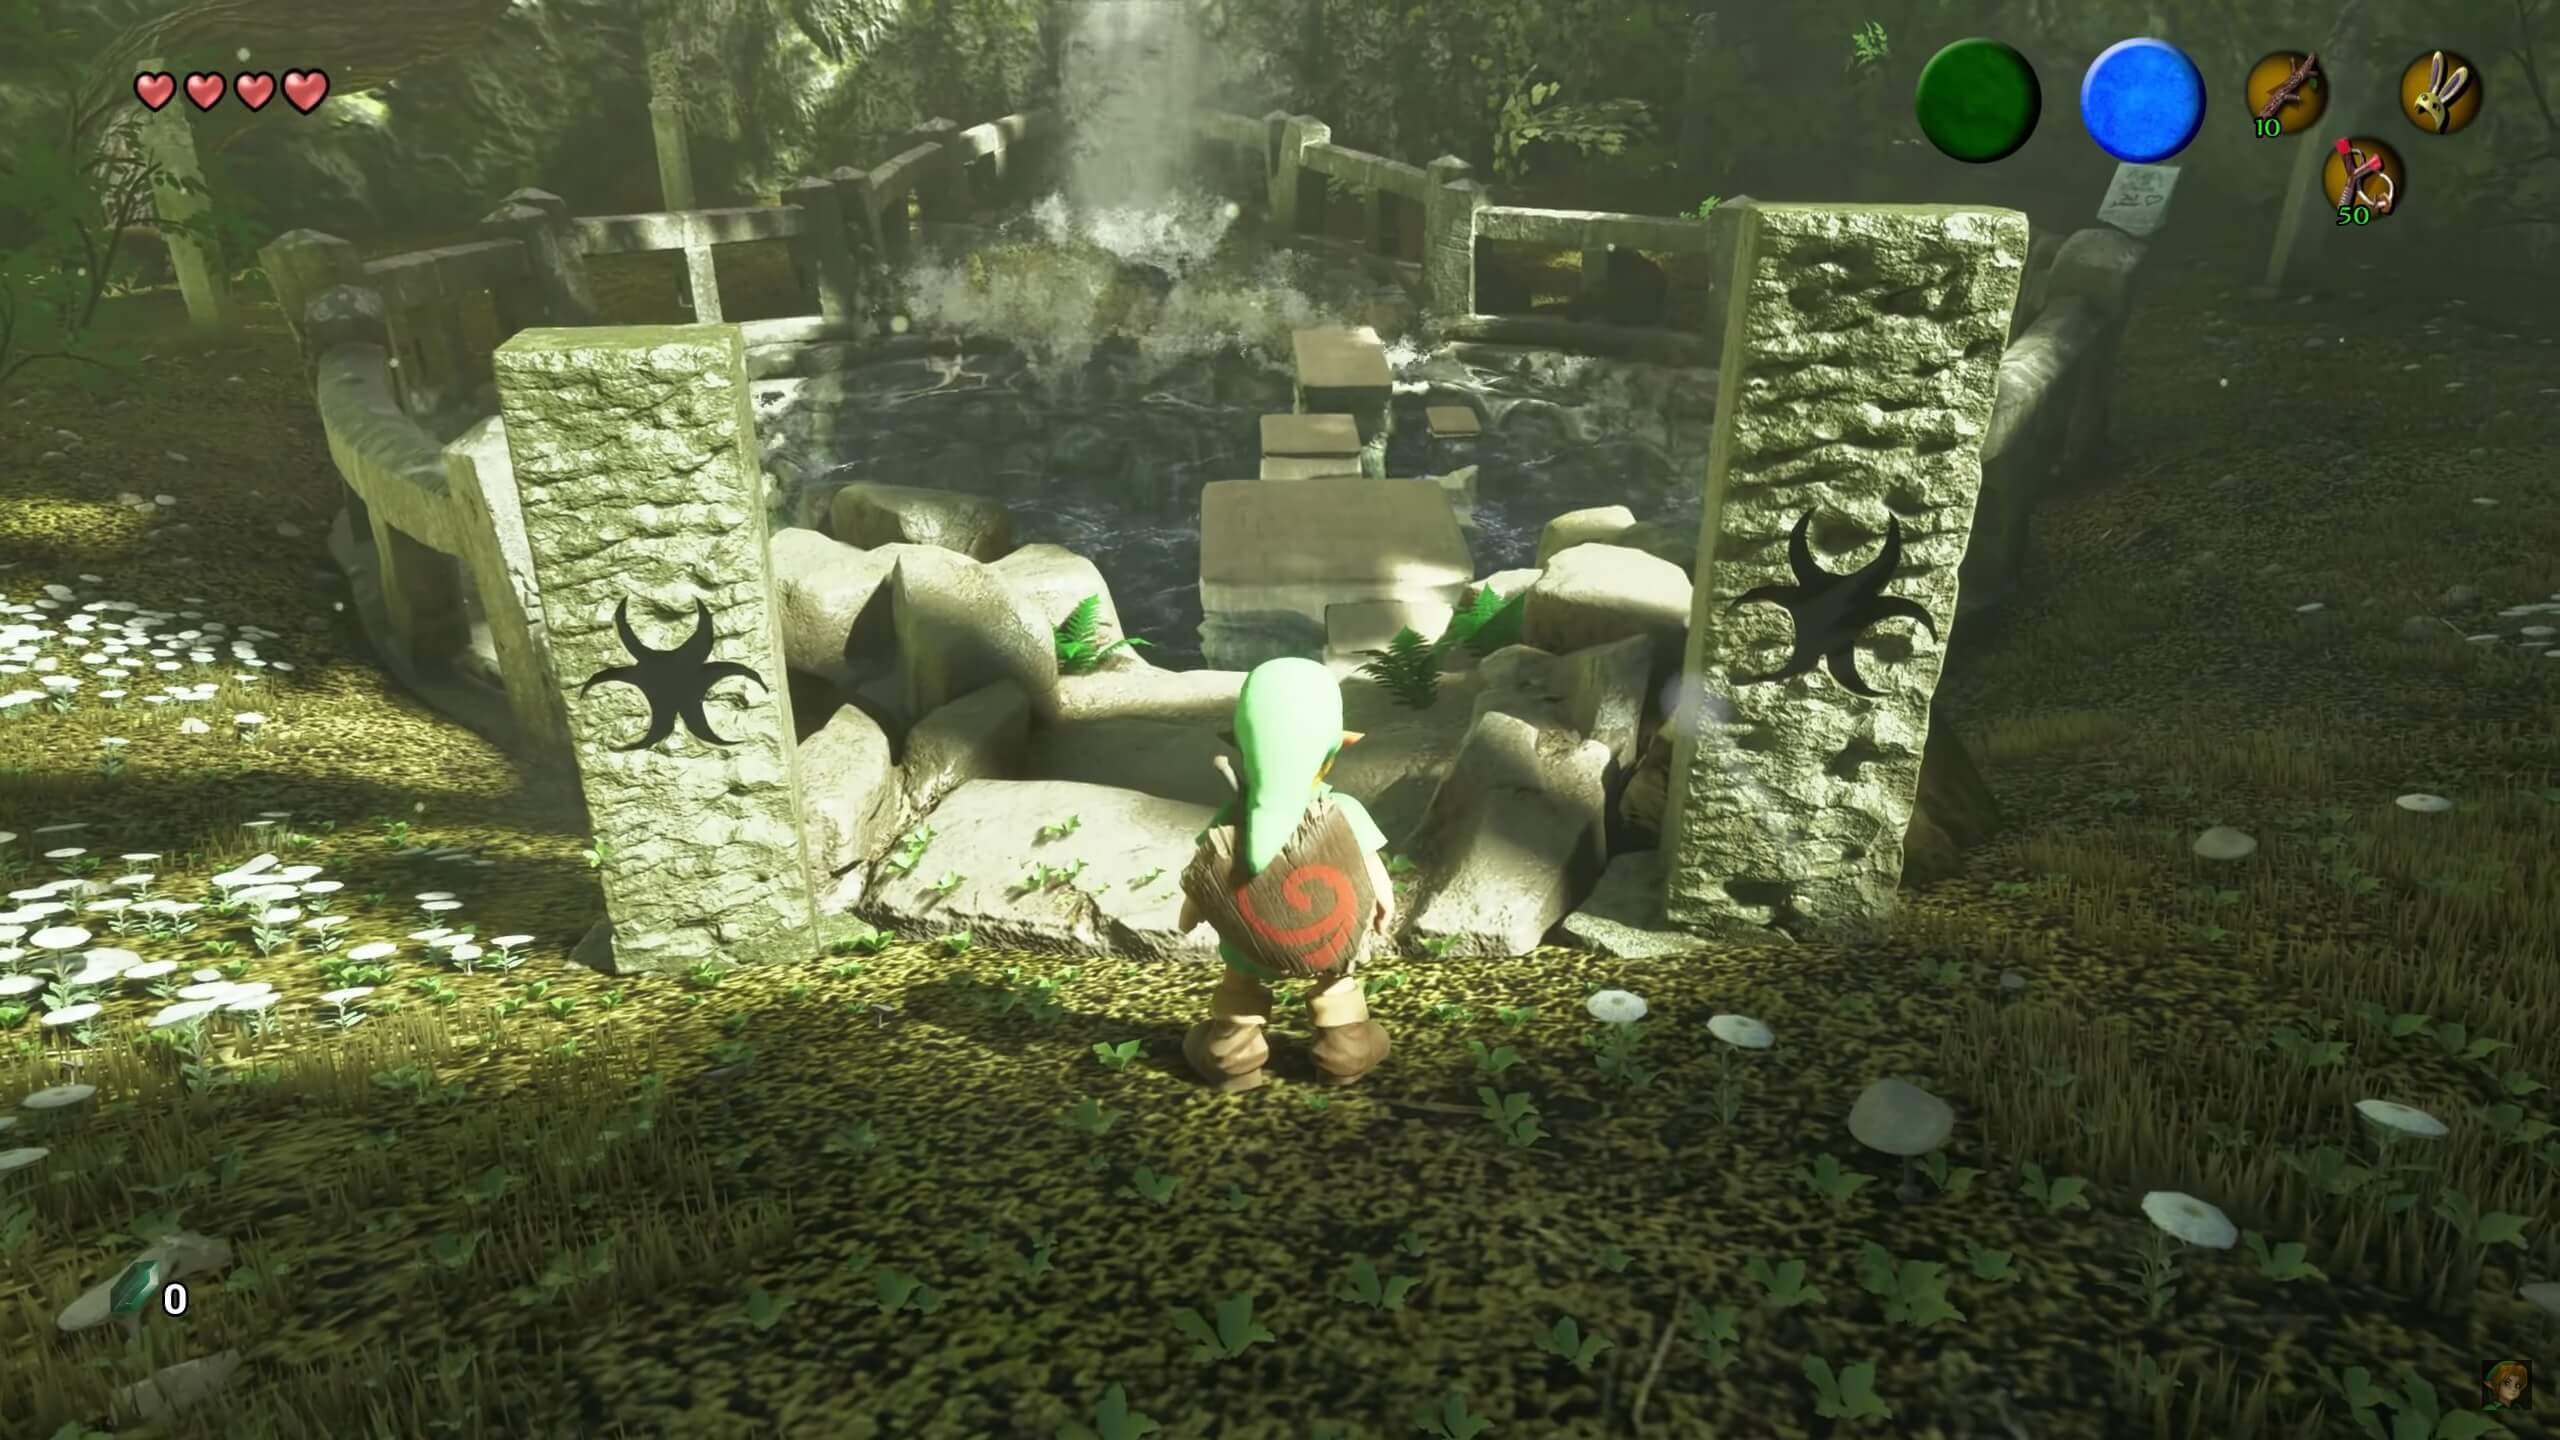 New Zelda: Ocarina of Time Demo in Unreal Engine 5 released, featuring DLSS  3 Frame Generation